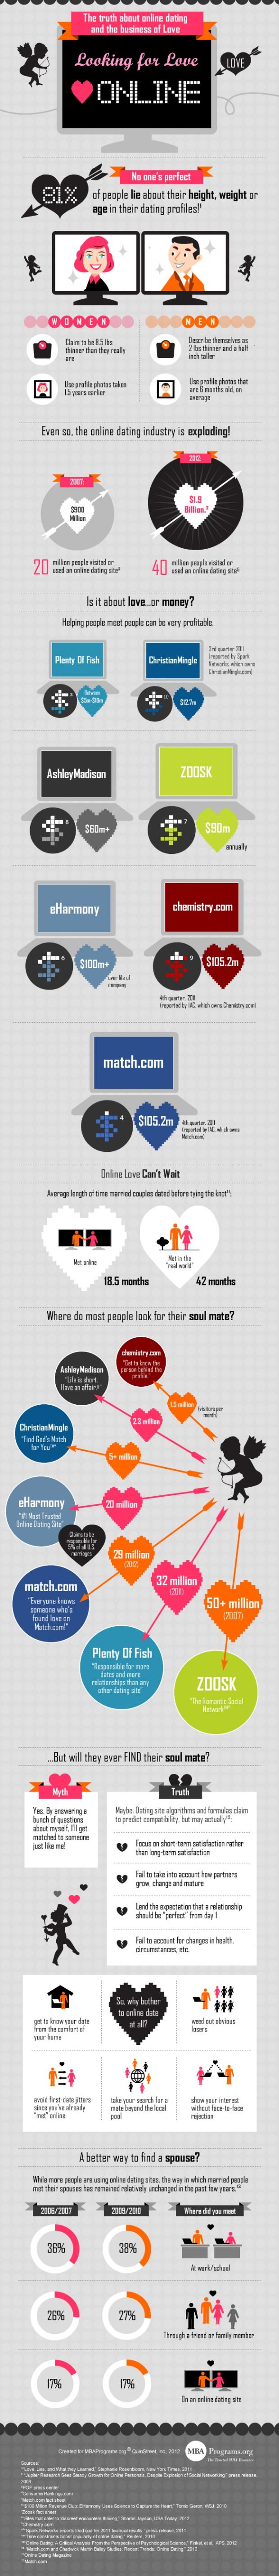 infographie-dating-us